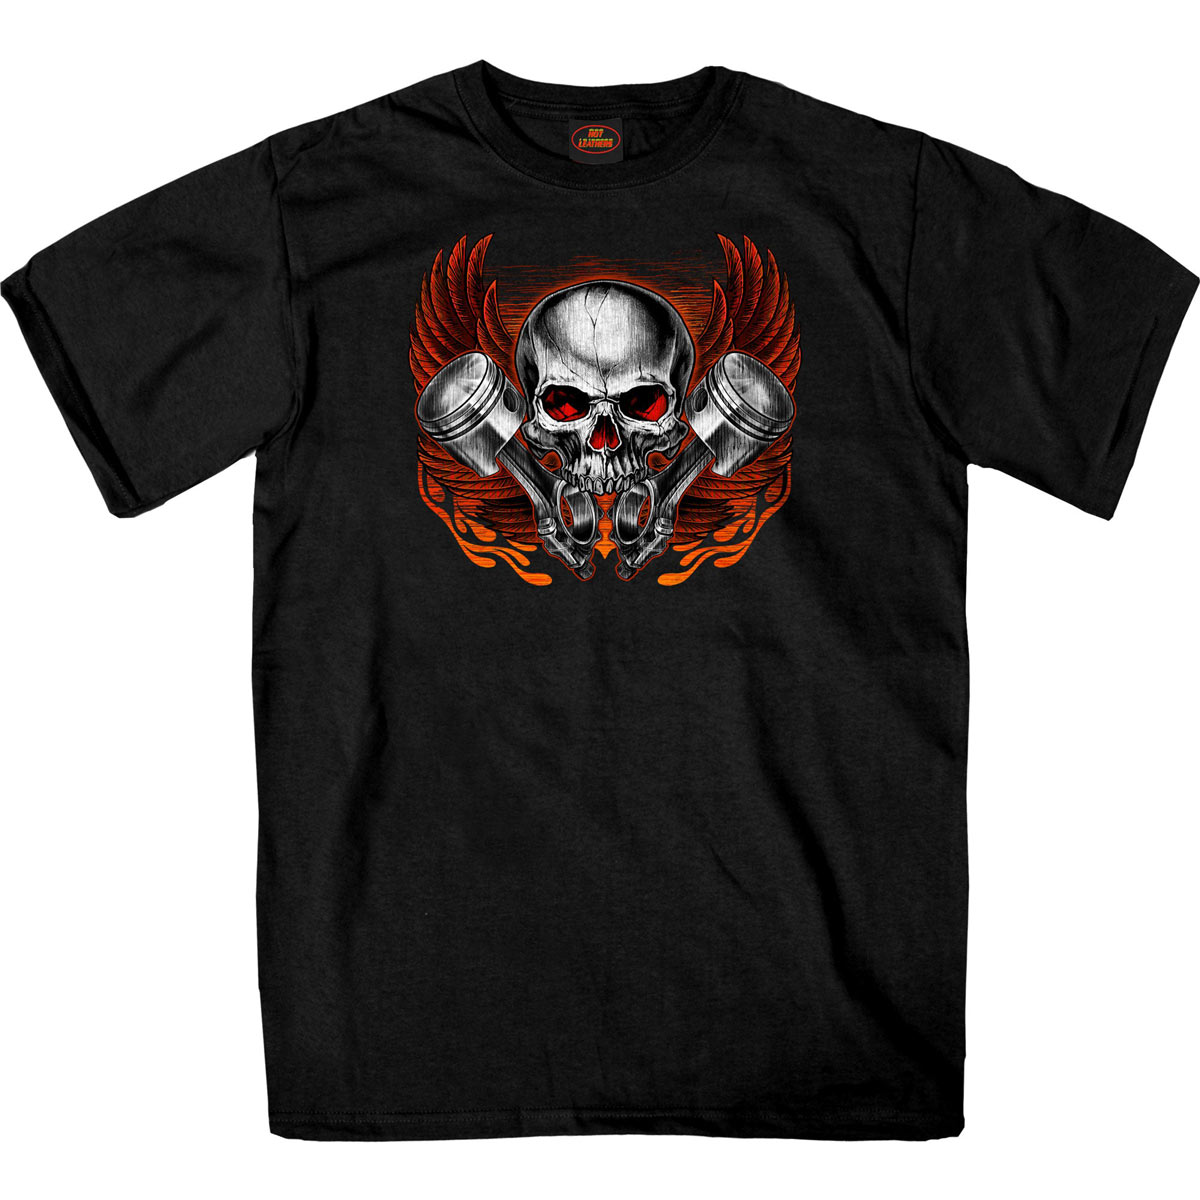 Hot Leathers GMD1535 Men's Black Skull and Pistons T-Shirt